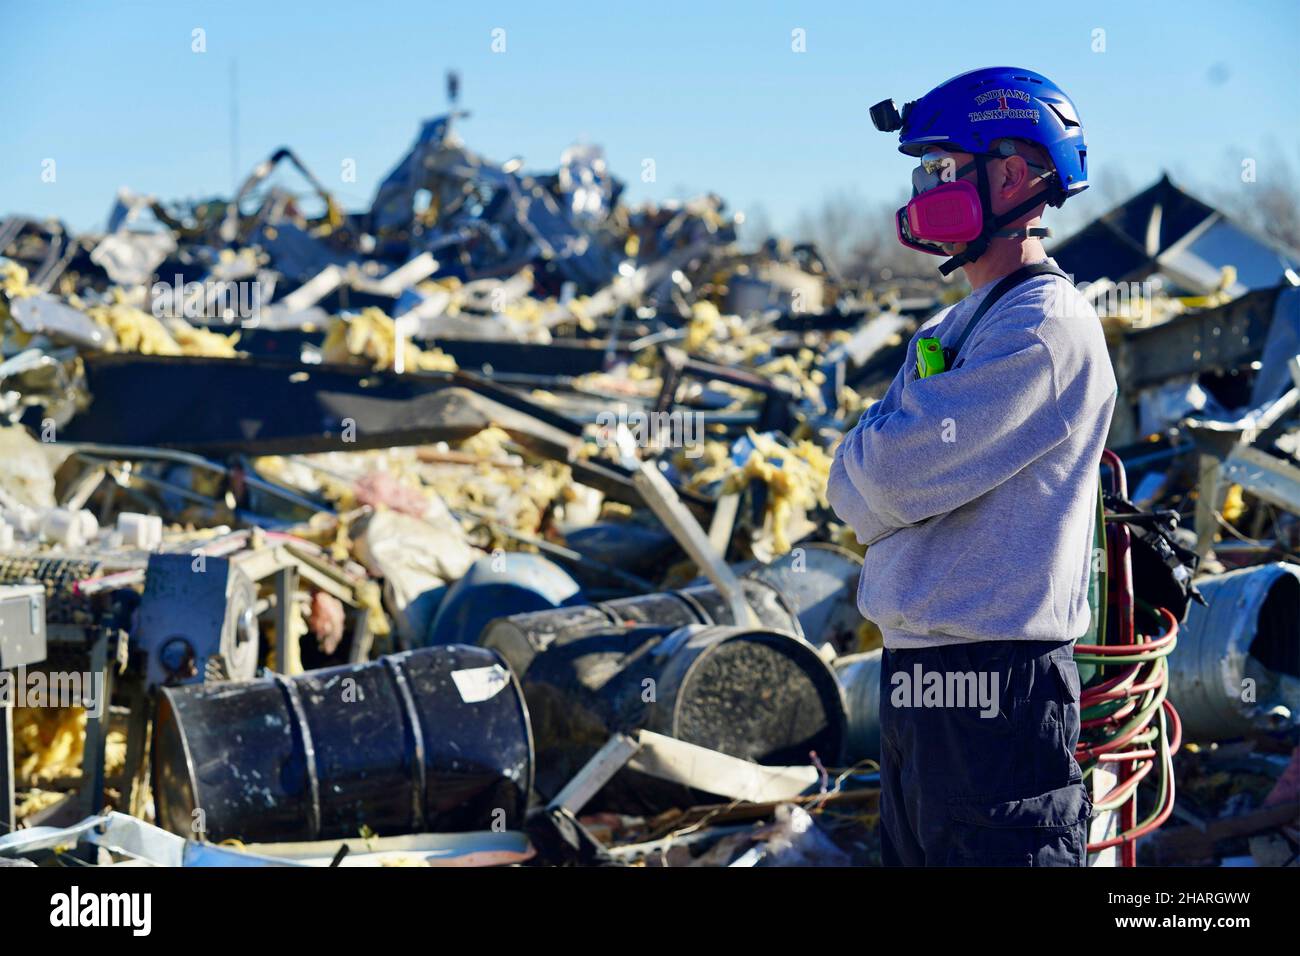 Mayfield, United States Of America. 13th Dec, 2021. Mayfield, United States of America. 13 December, 2021. Homeland Security Secretary Alejandro Mayorkas, views the aftermath of devastating tornadoes that swept across four states destroying buildings and killing dozens December 13, 2021 in Mayfield, Kentucky. Credit: Alexis Hall/FEMA/Alamy Live News Stock Photo